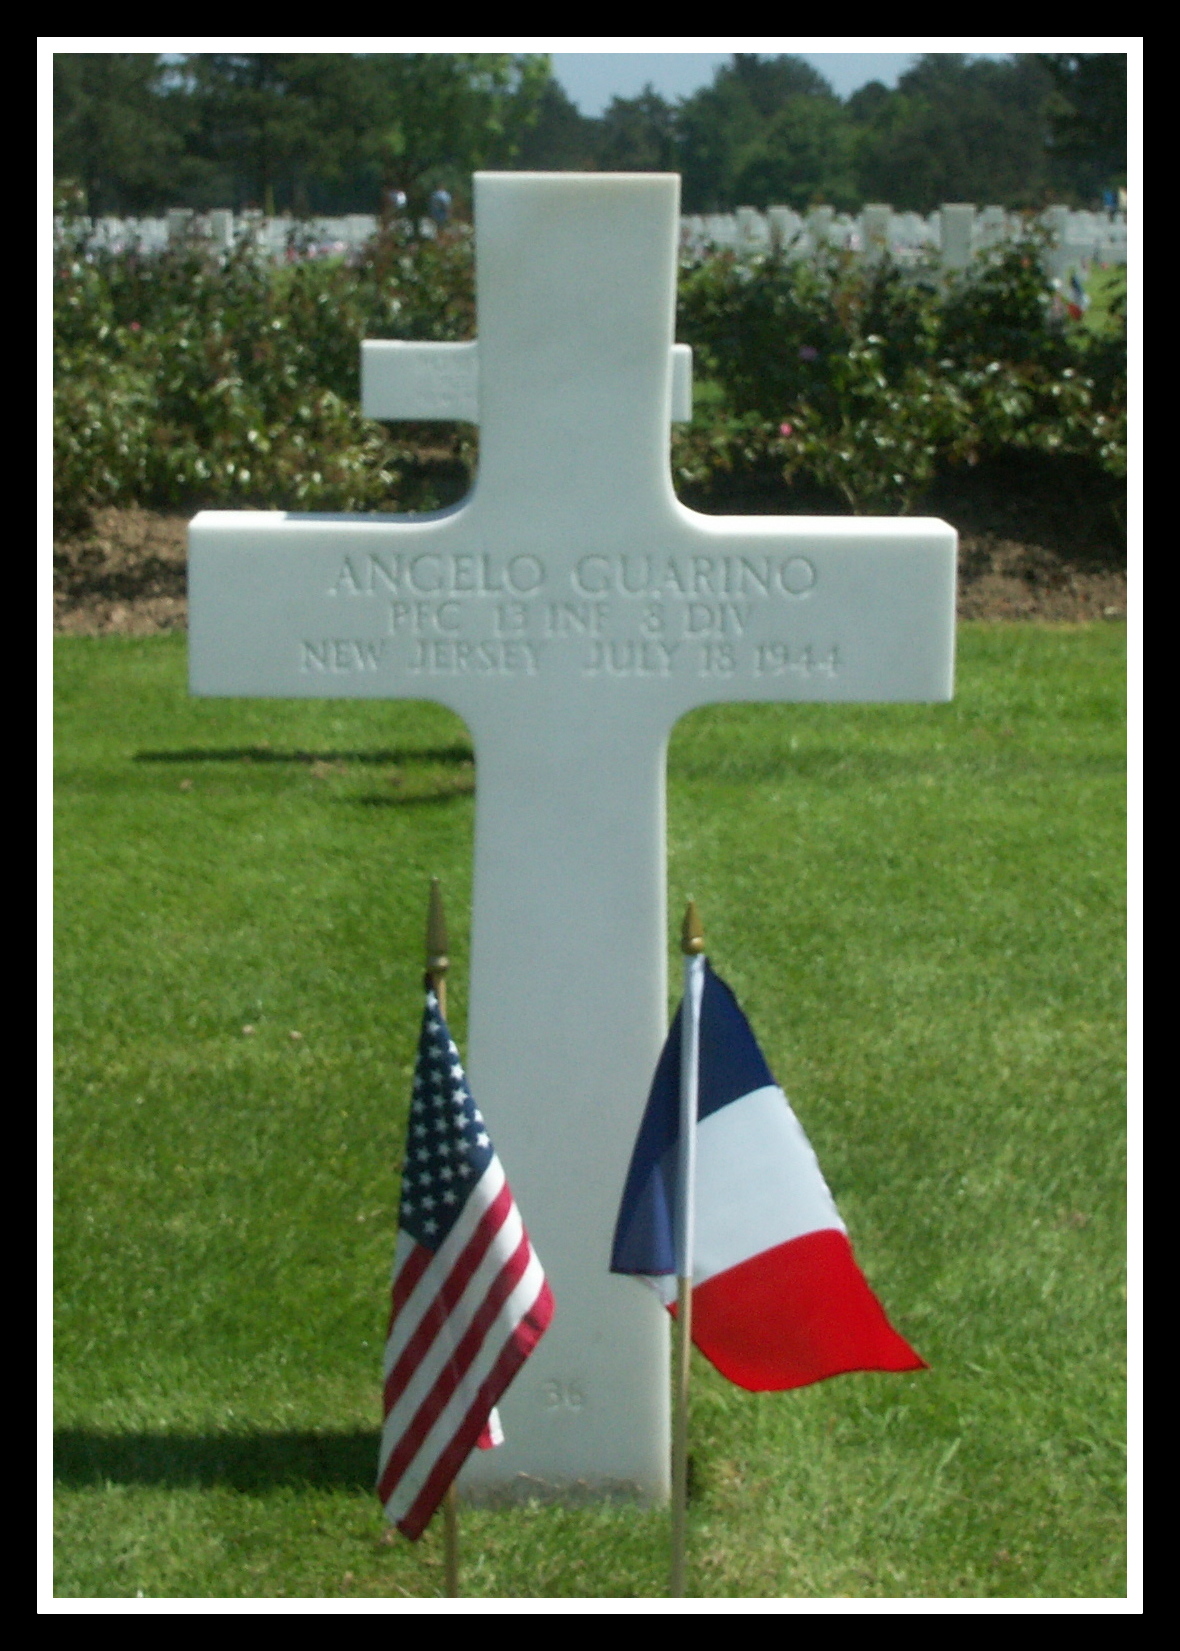 Normandy Photo Copyright © 2004 by Robert Caruso, used by permission